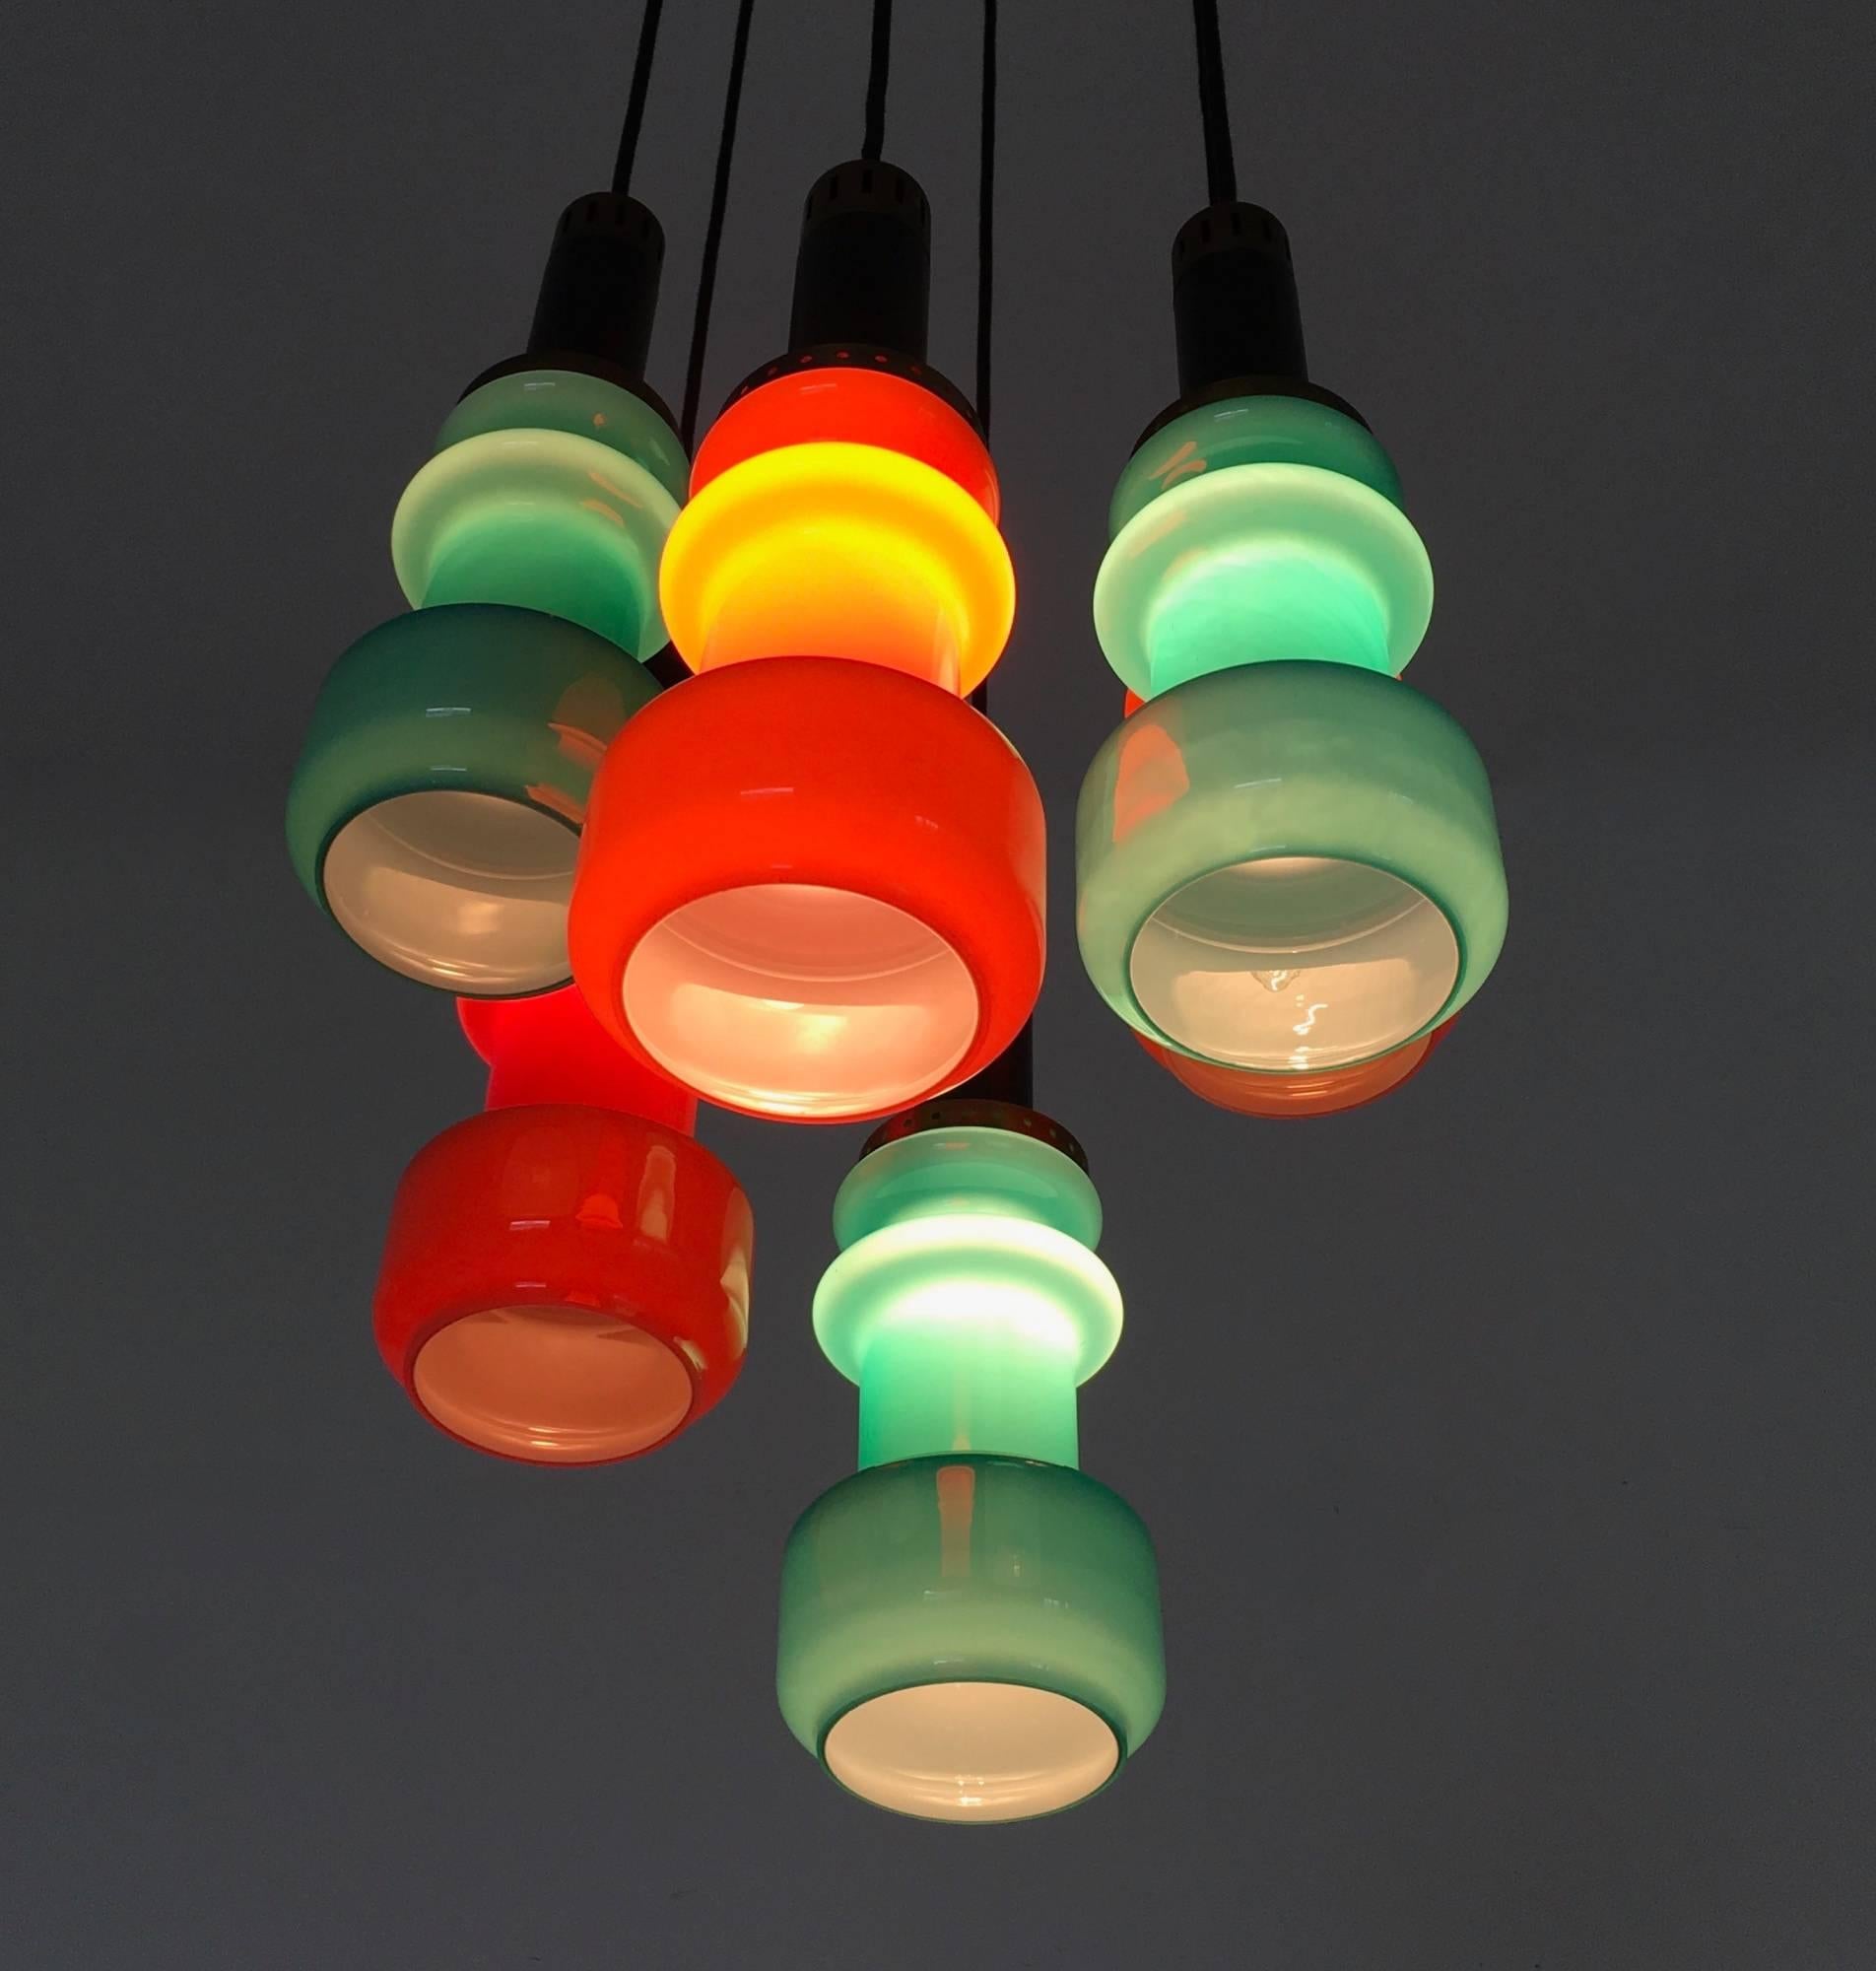 Metal Six-Light Teal and Orange Chandelier by Stilnovo, Italy, 1960s